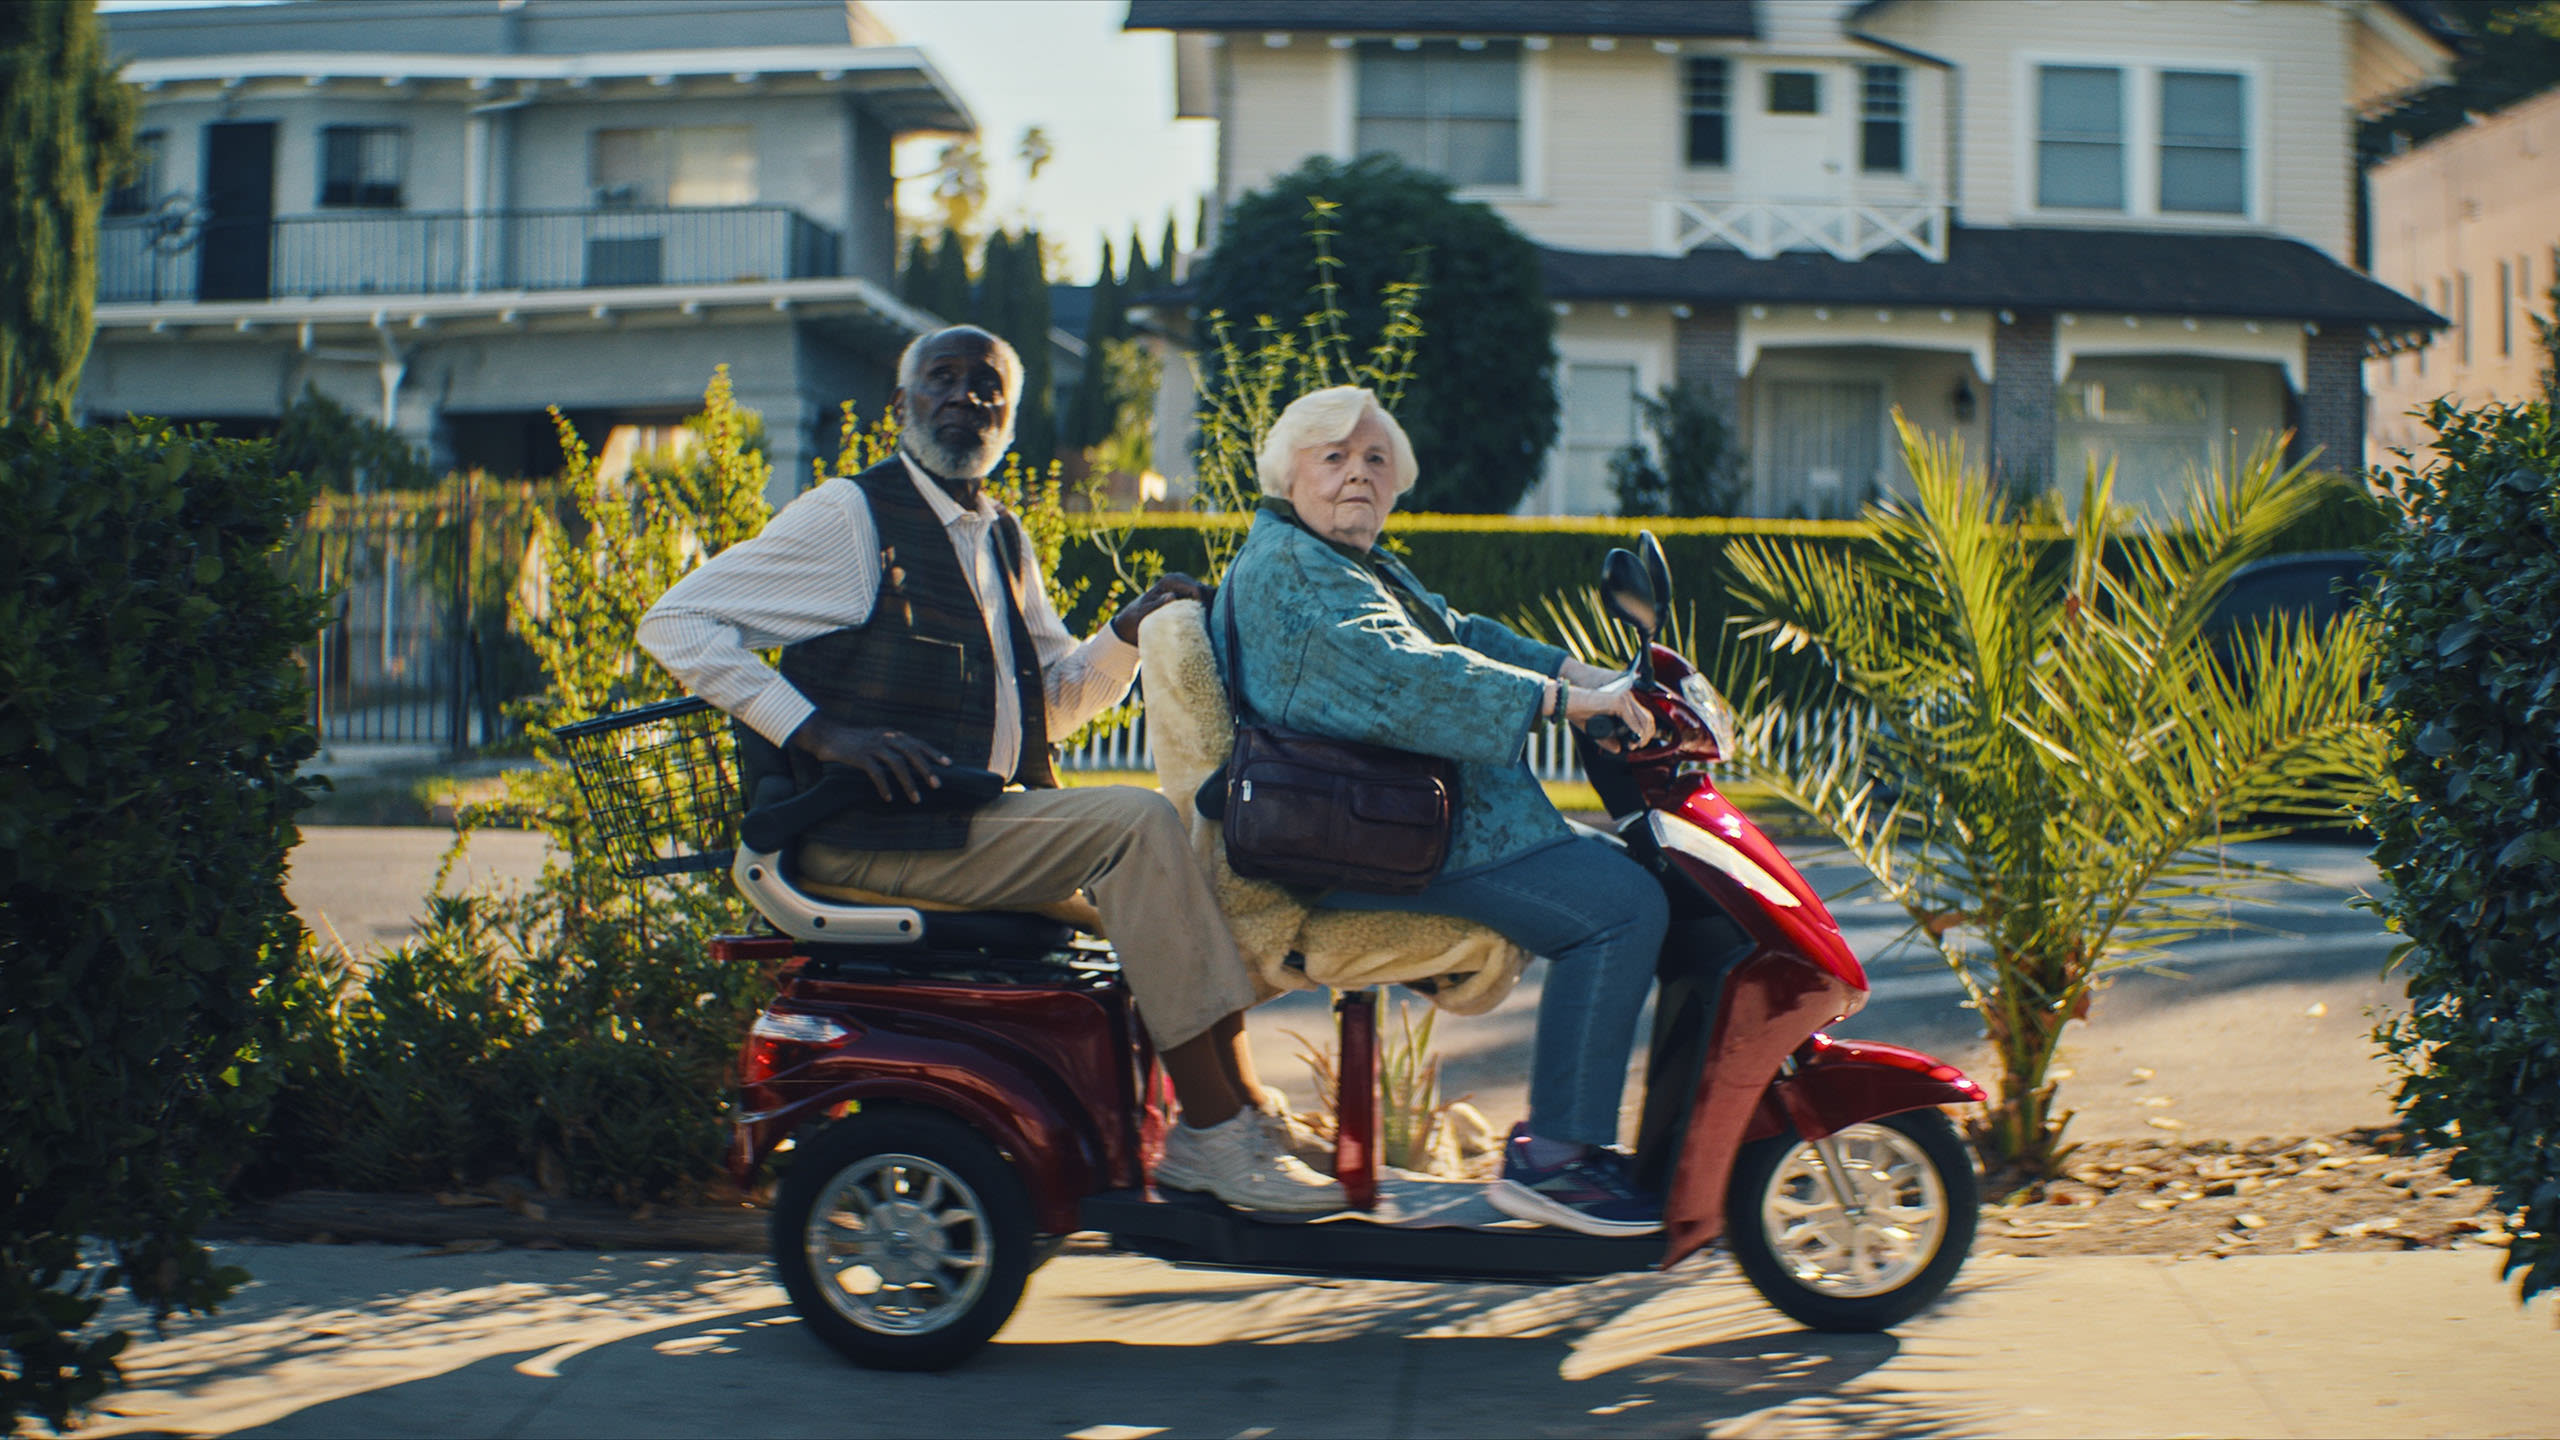 Defying age and expectations, 94-year-old June Squibb is Hollywood’s latest action star